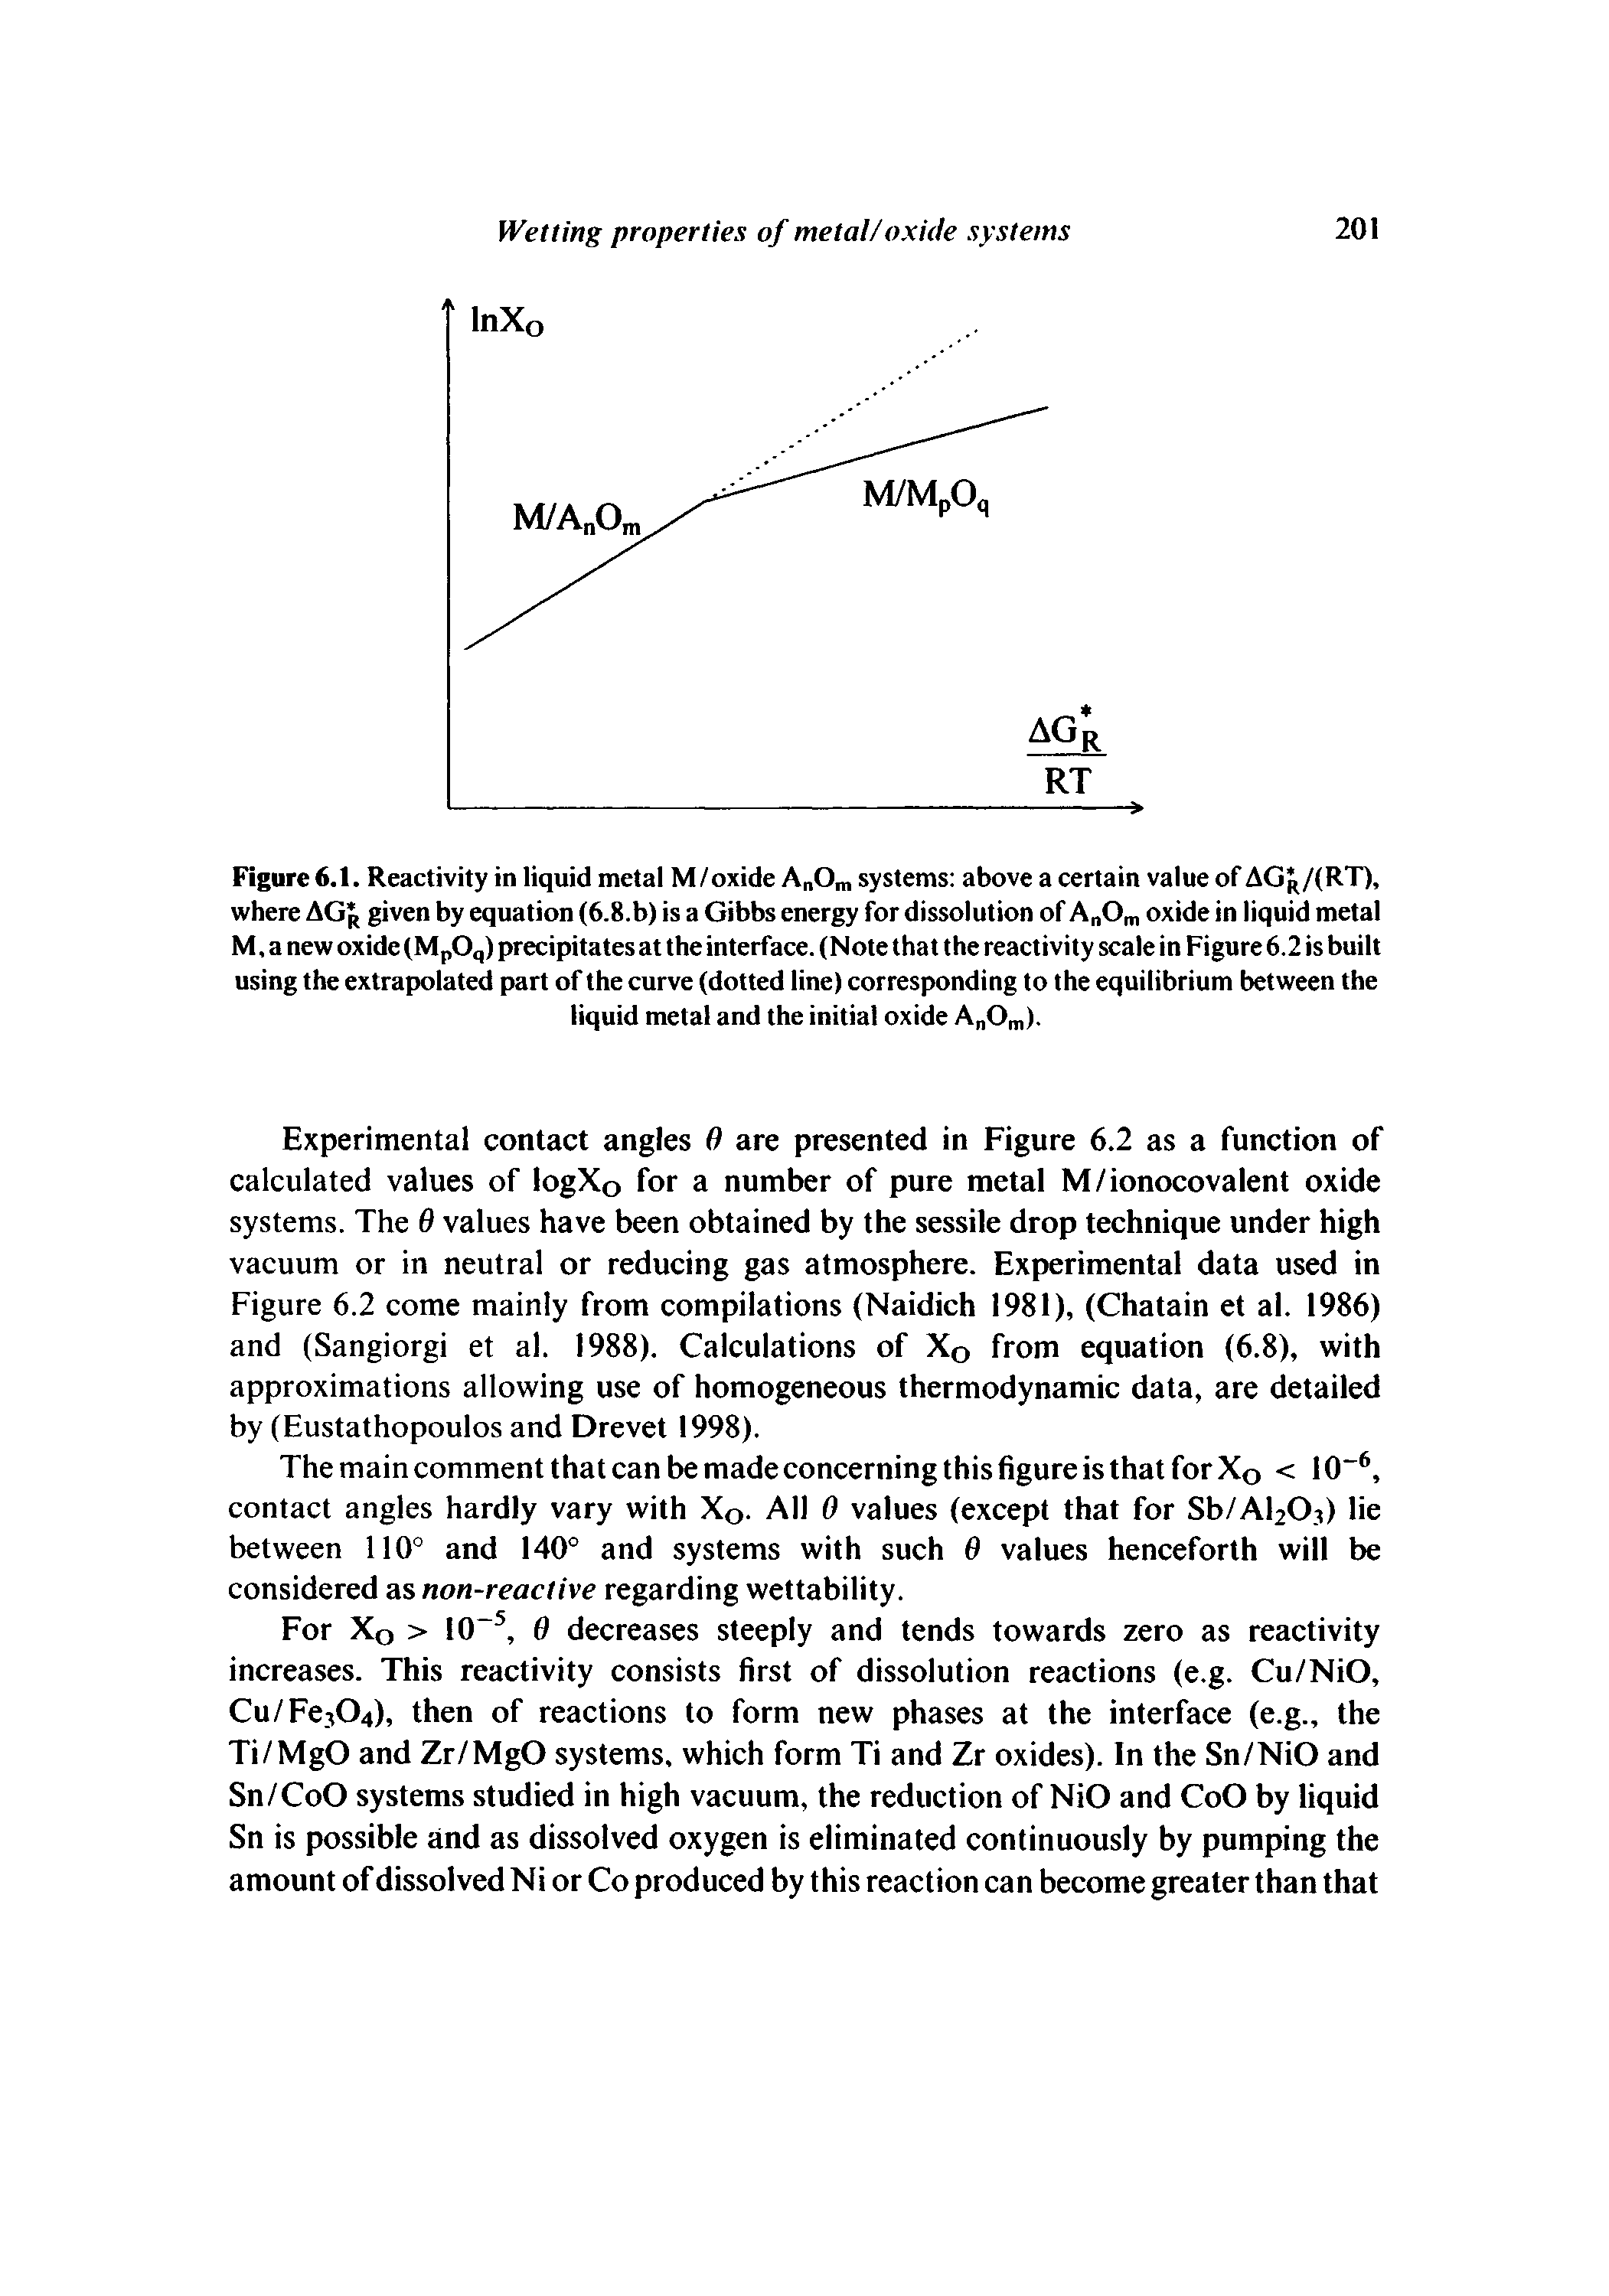 Figure 6.1. Reactivity in liquid metal M/oxide AnOm systems above a certain value of AGr/(RT), where AG, given by equation (6.8.b) is a Gibbs energy for dissolution of AnOm oxide in liquid metal M, a new oxide (MpOq) precipitates at the interface. (Note that the reactivity scale in Figure 6.2 is built using the extrapolated part of the curve (dotted line) corresponding to the equilibrium between the liquid metal and the initial oxide A Om).